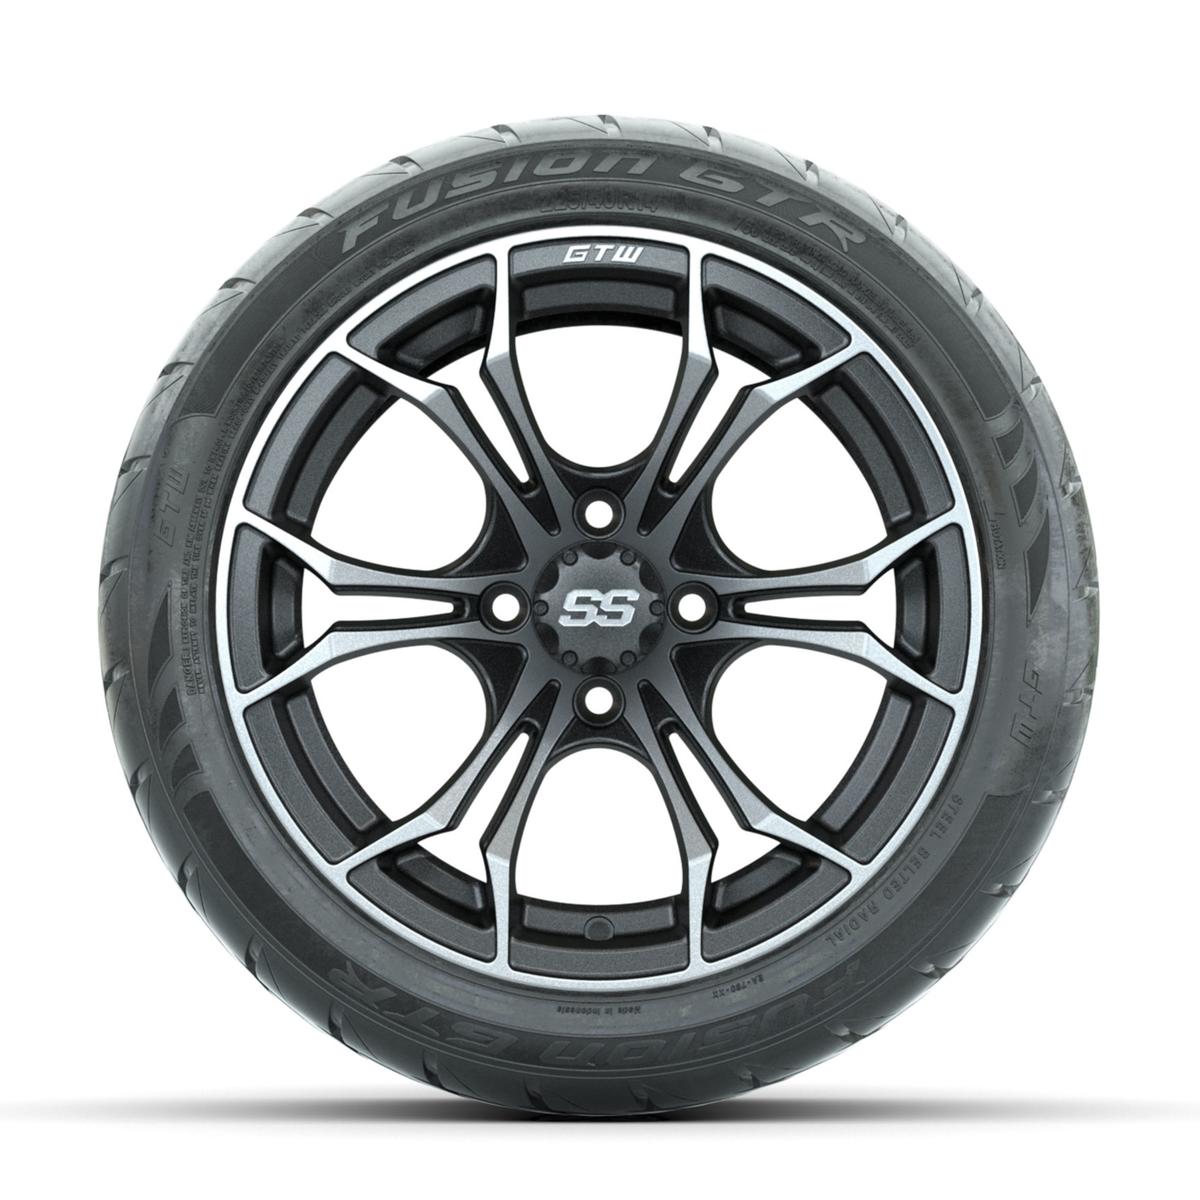 GTW Spyder Matte Grey 14 in Wheels with 225/40-R14 Fusion GTR Street Tires – Full Set